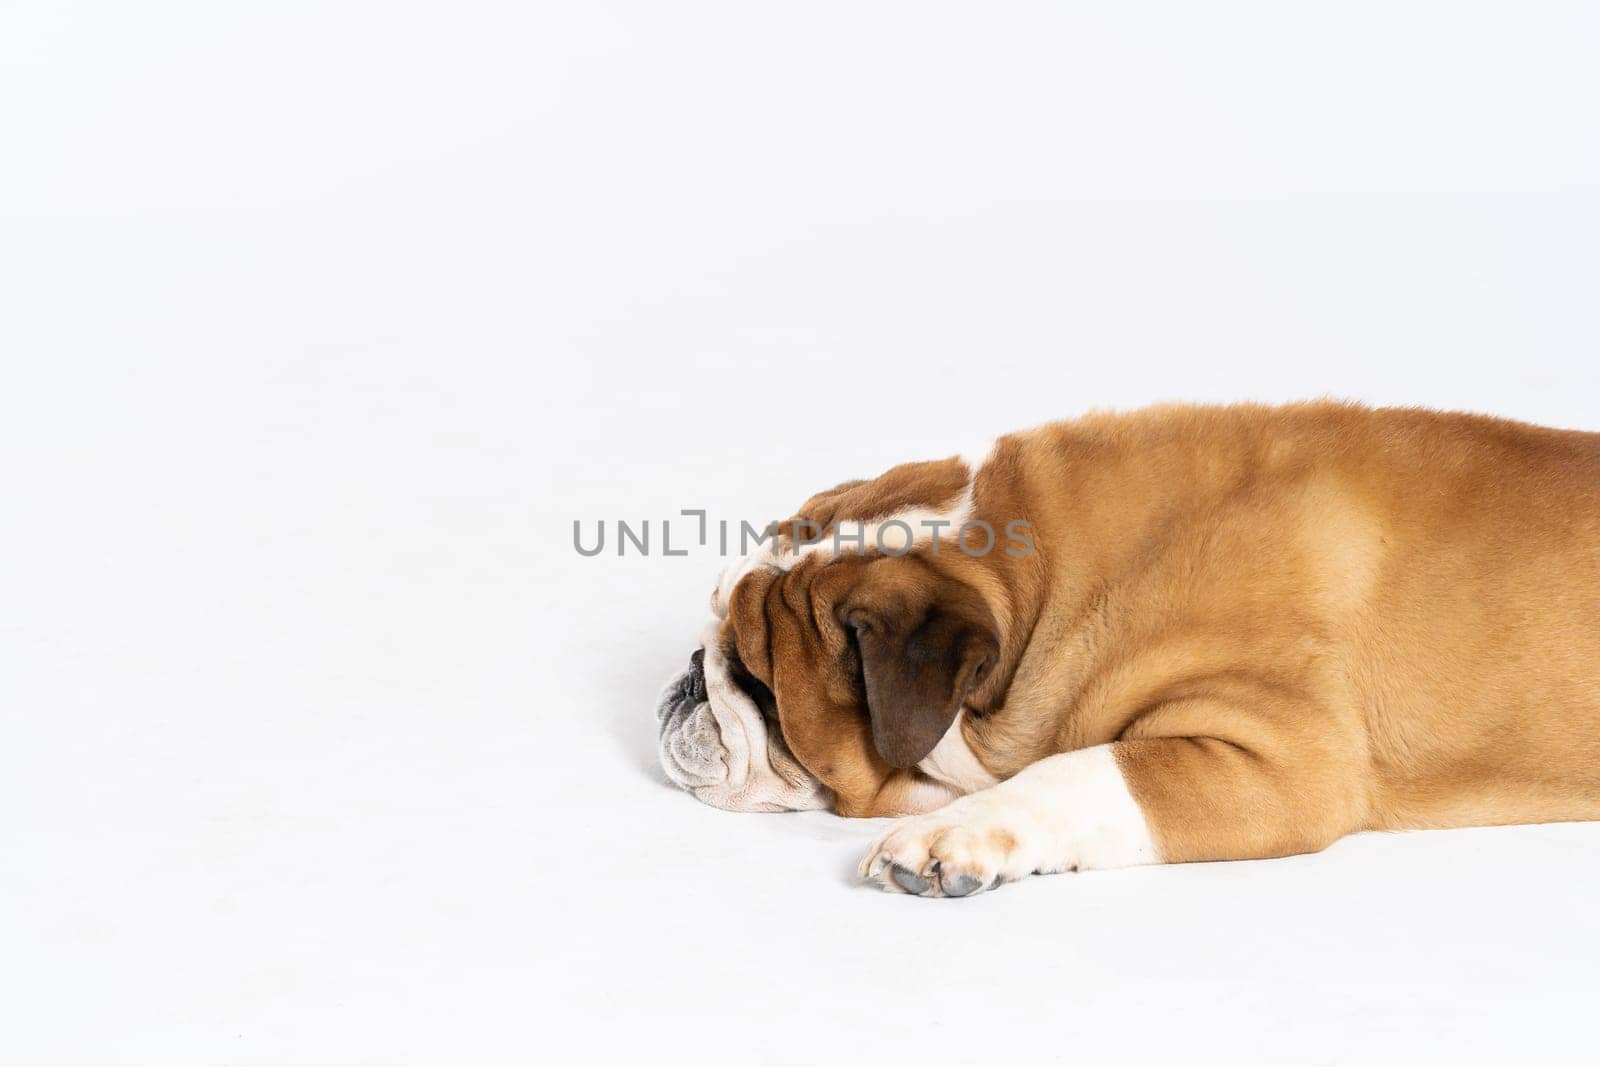 The dog is lying down with its mouth closed. The English Bulldog was bred as a companion and deterrent dog. A breed with a brown coat with white patches.